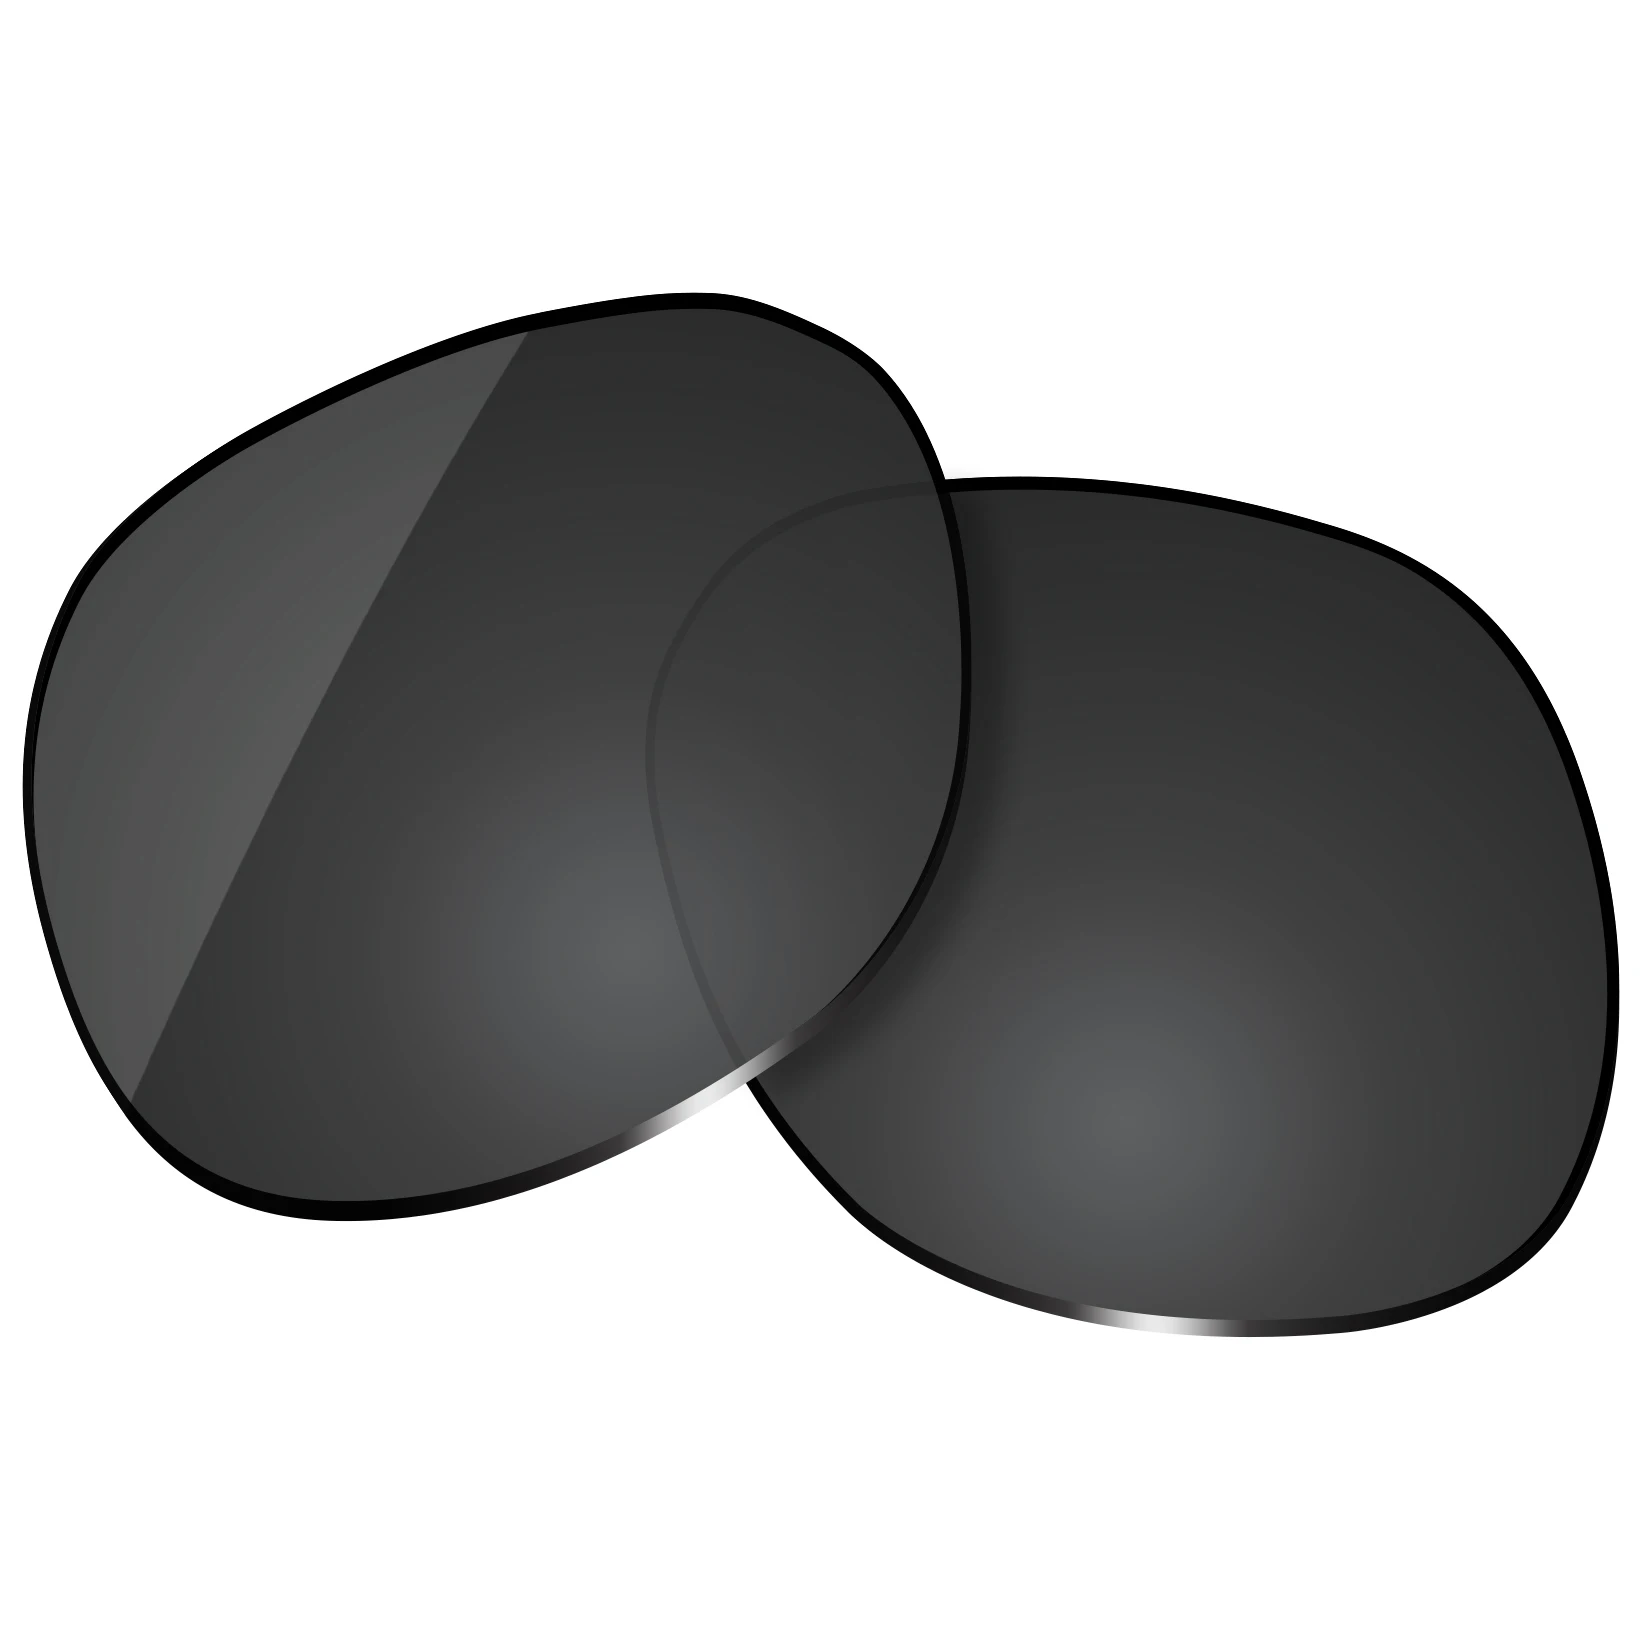 OOWLIT Polarized Replacement Lenses for-RayBan RB4312-57 Sunglasses (Lens Only)